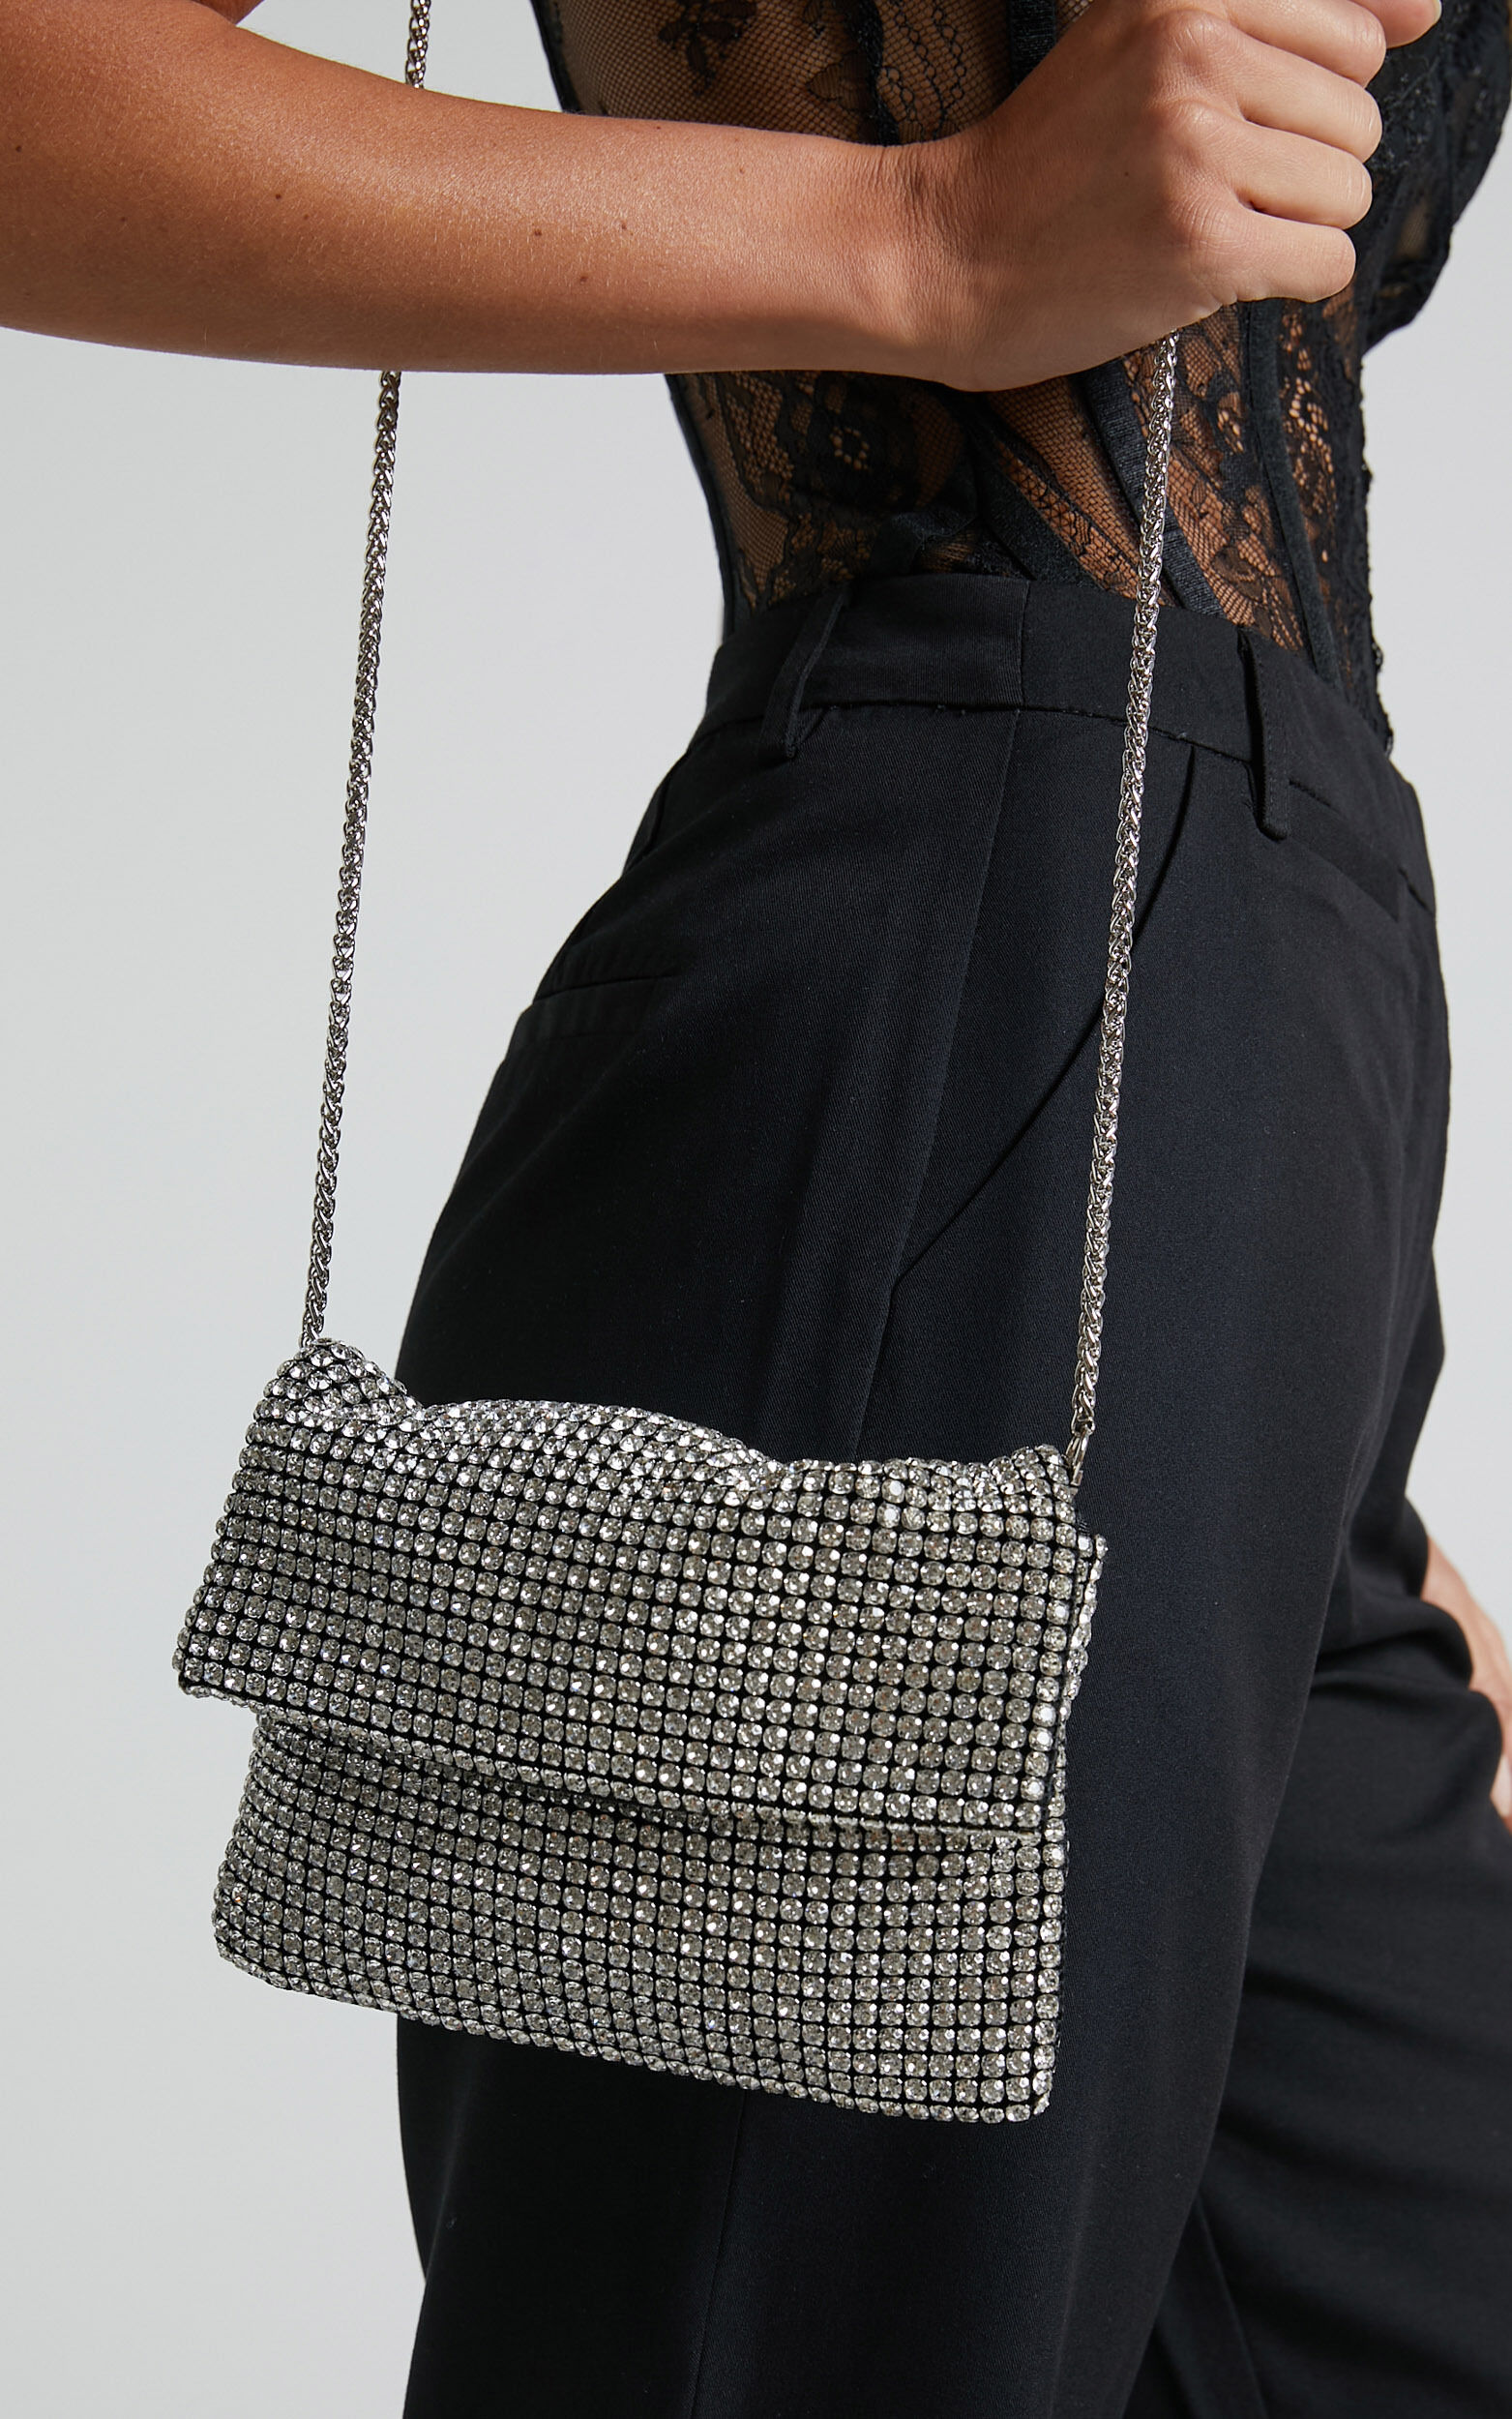 Serephine Bag - Chain Strap Clutch Bag in Silver Diamante - NoSize, SLV2, super-hi-res image number null